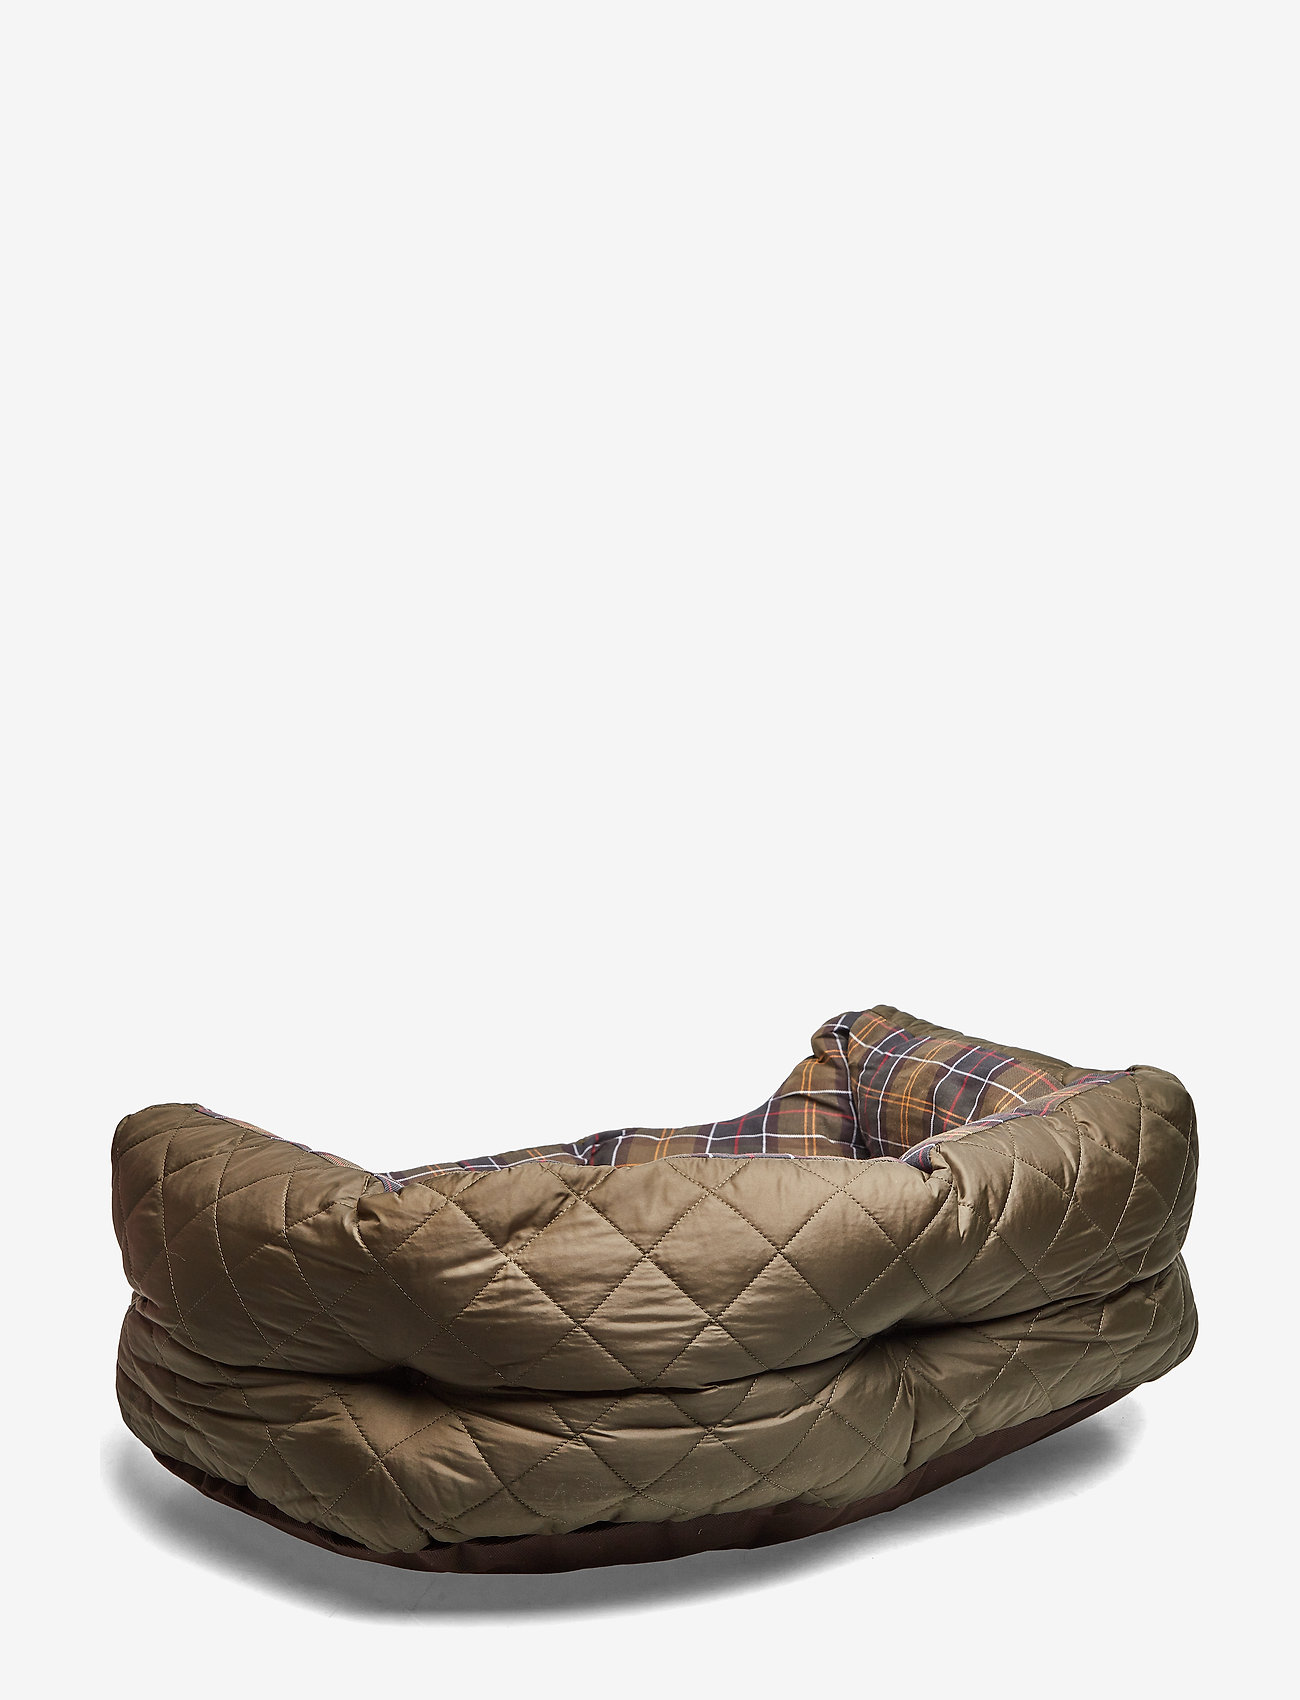 Barbour - Barbour Quilted Bed 30 - Šunų gultai - olive - 1